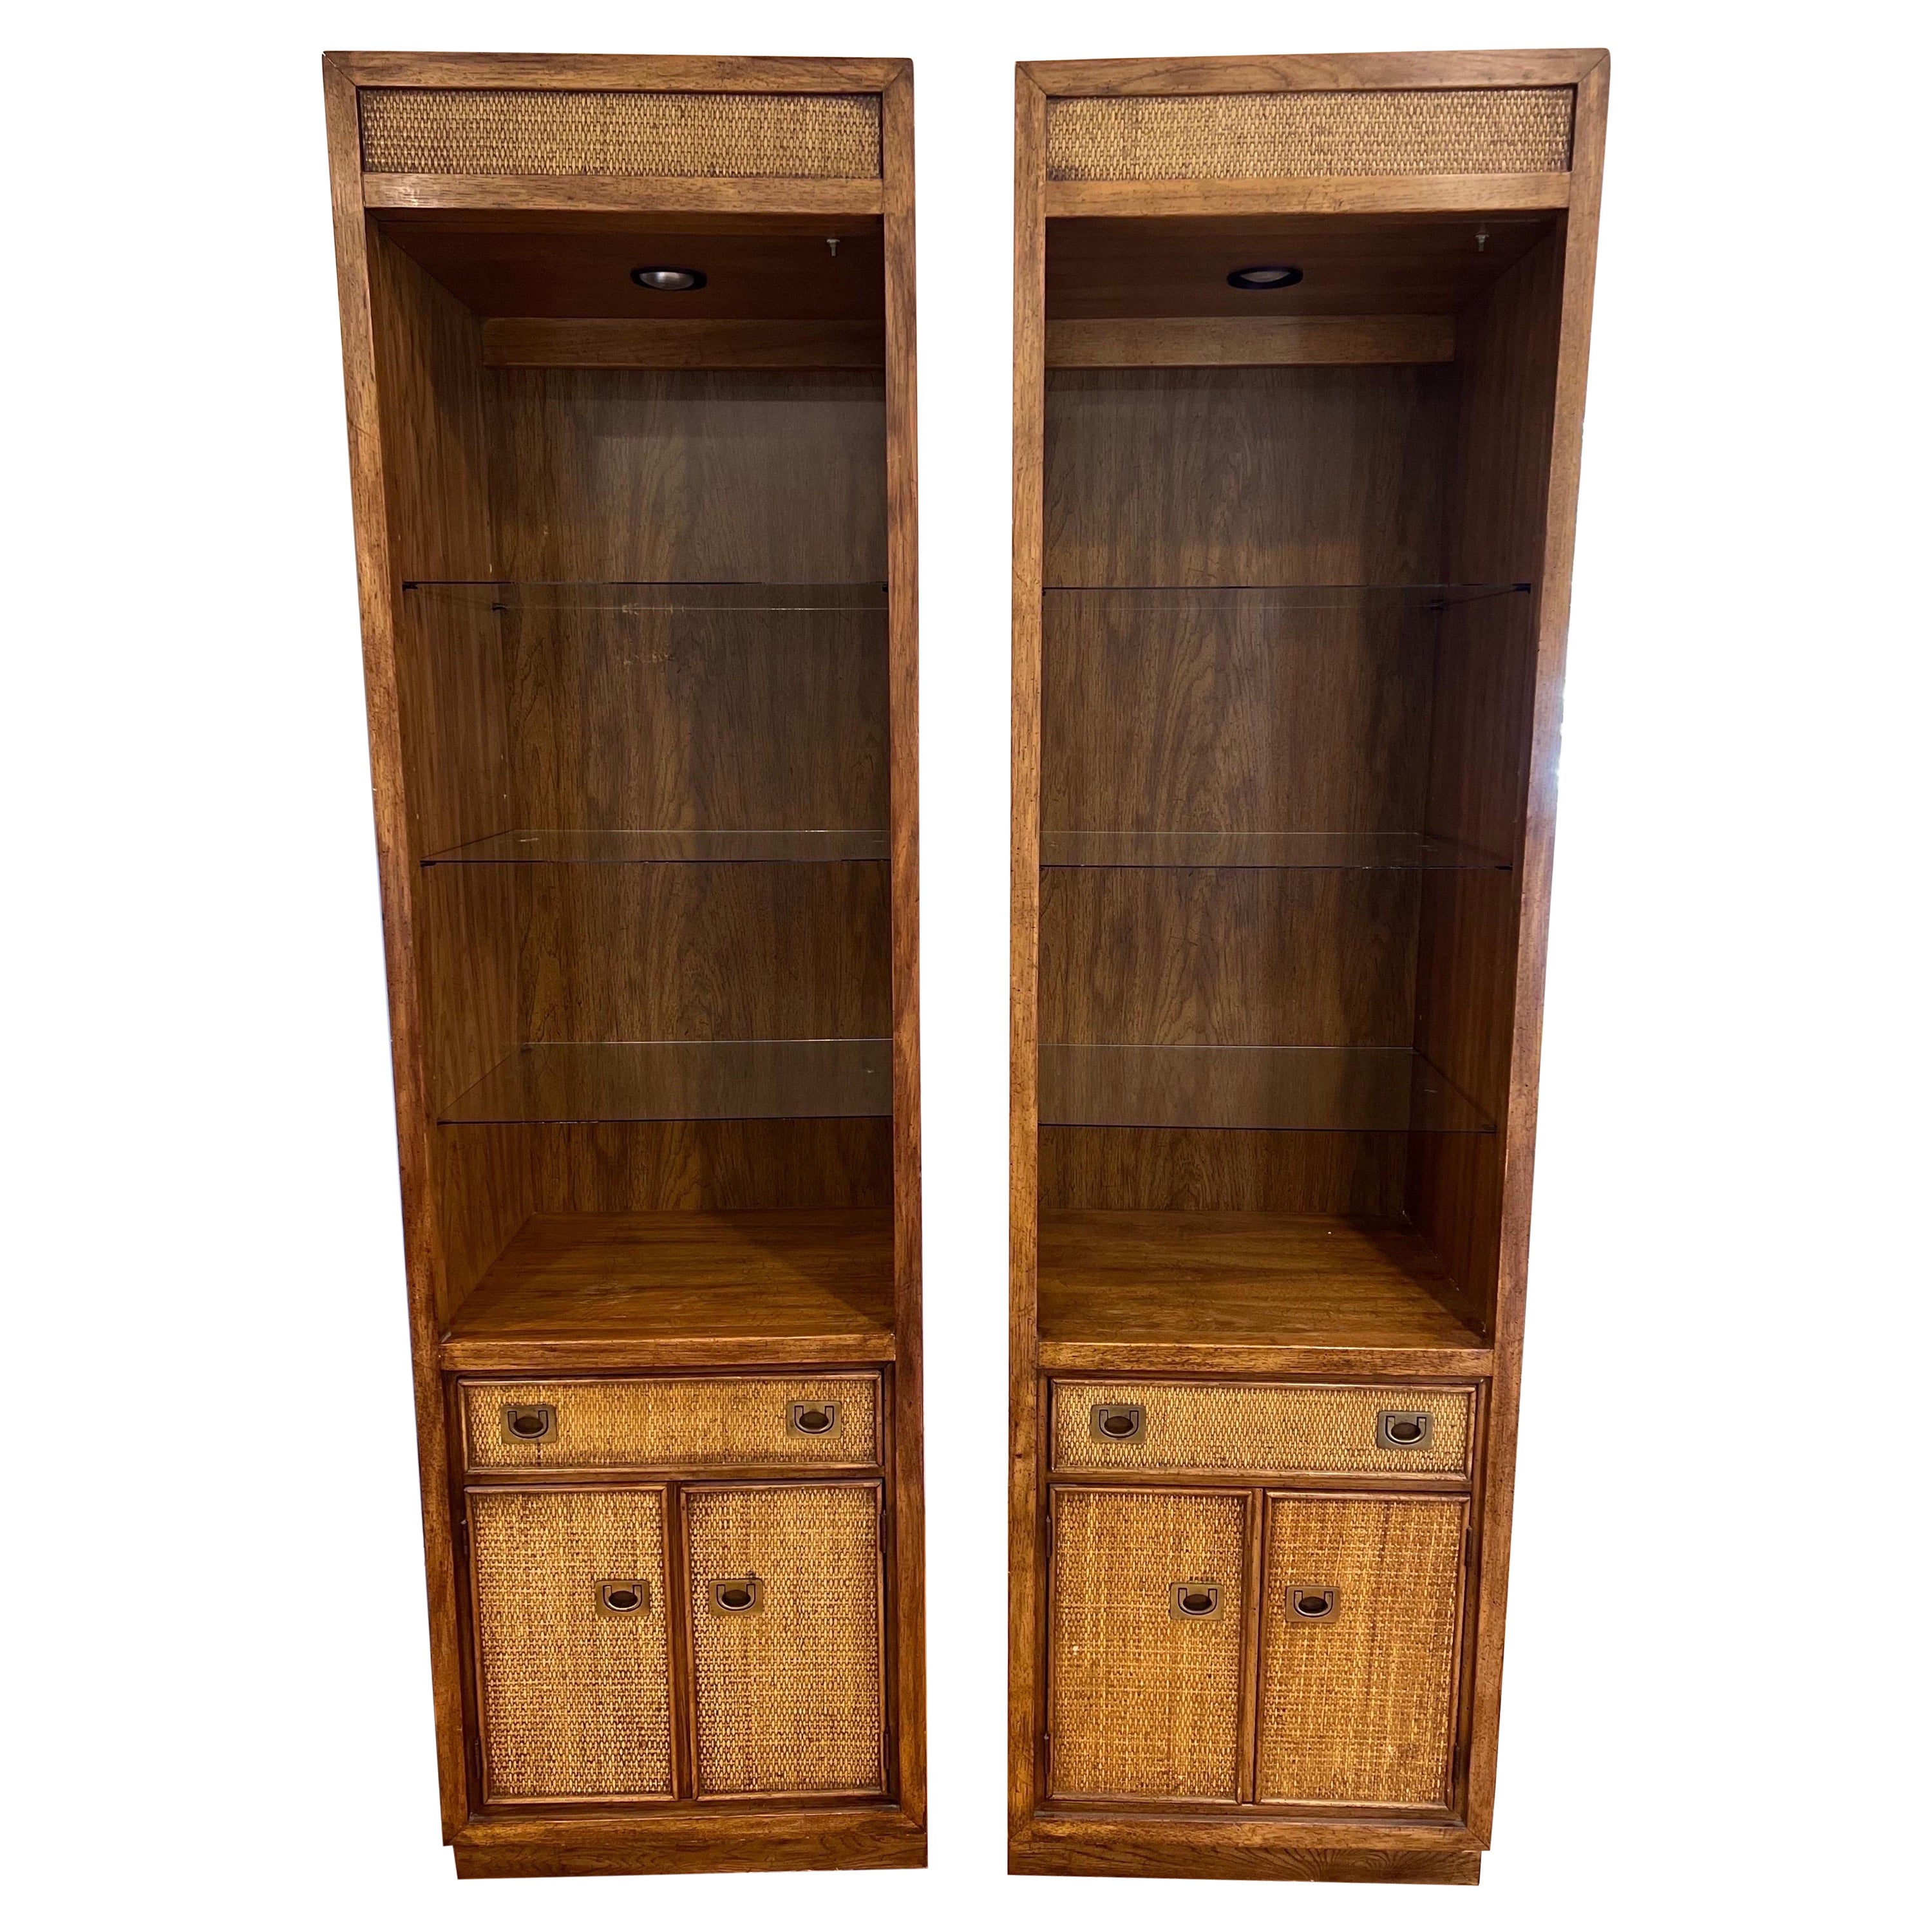 Pair rare MCM American of Martinsville Walnut Display Cabinets / Shelves 